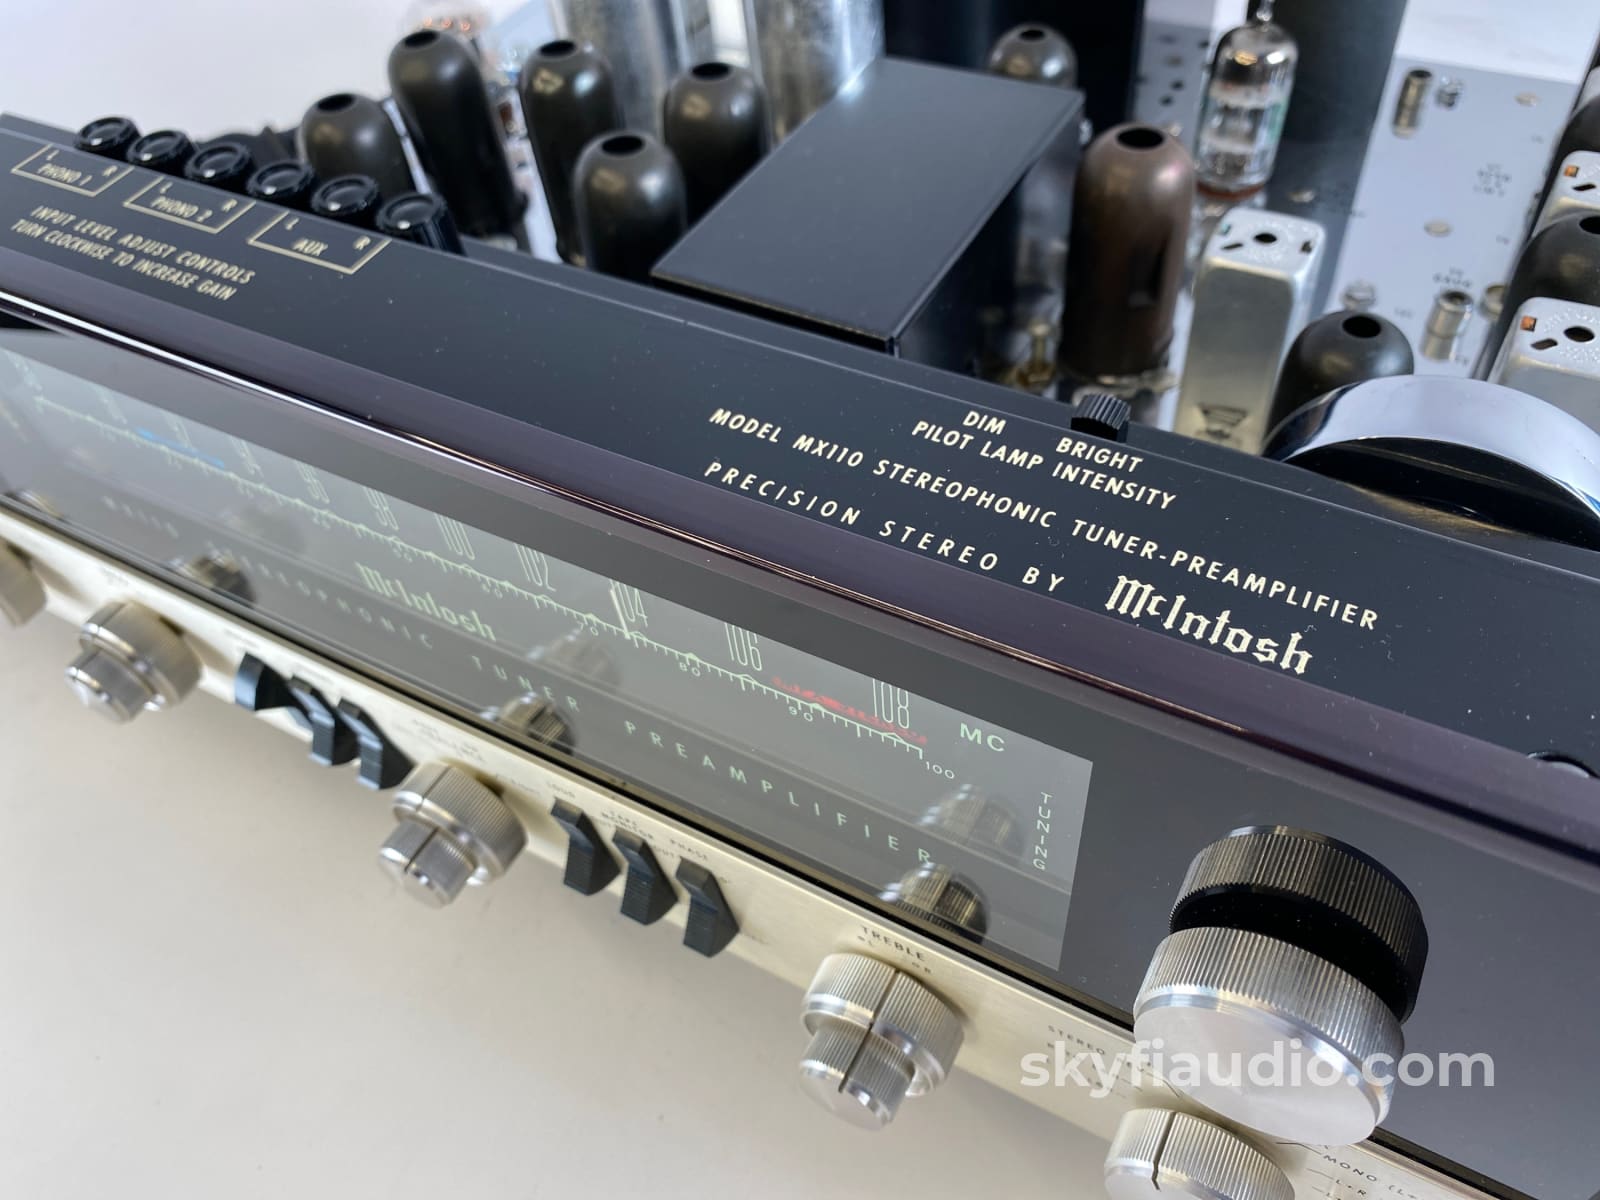 Mcintosh Mx110 Tube Tuner Preamp - Restored To Perfection Preamplifier